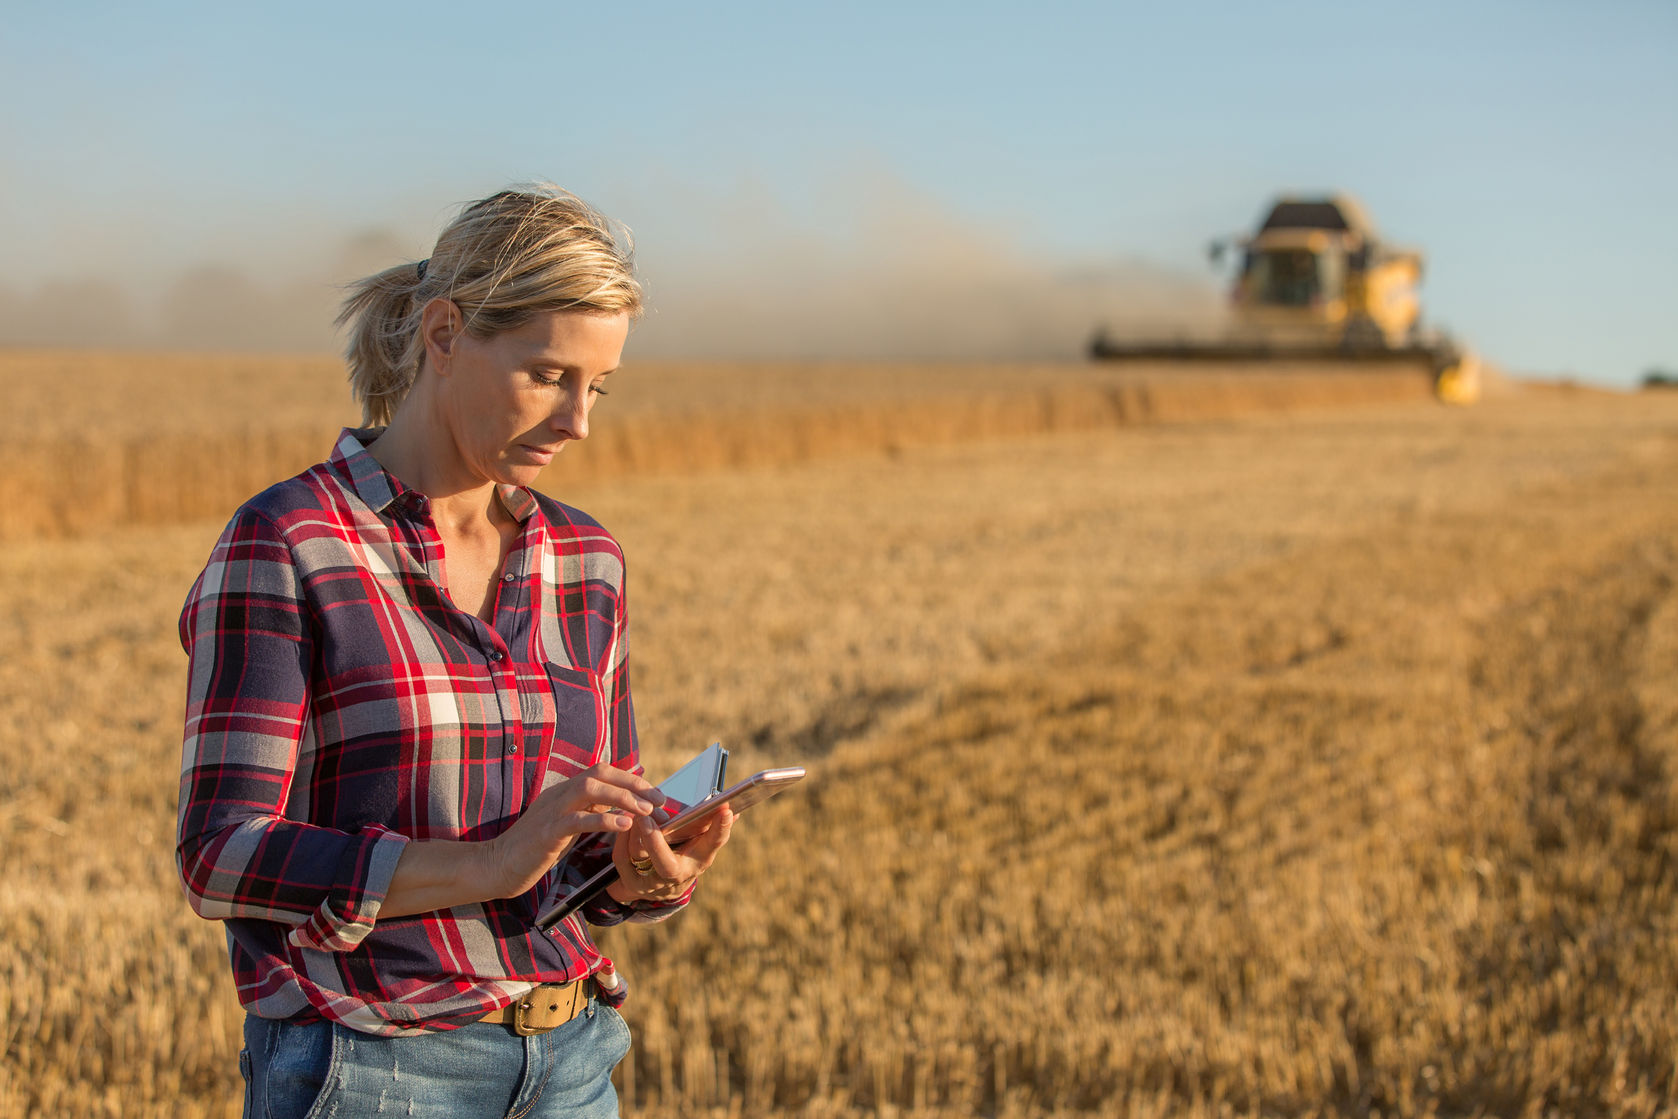 On-farm connectivity: Getting connected